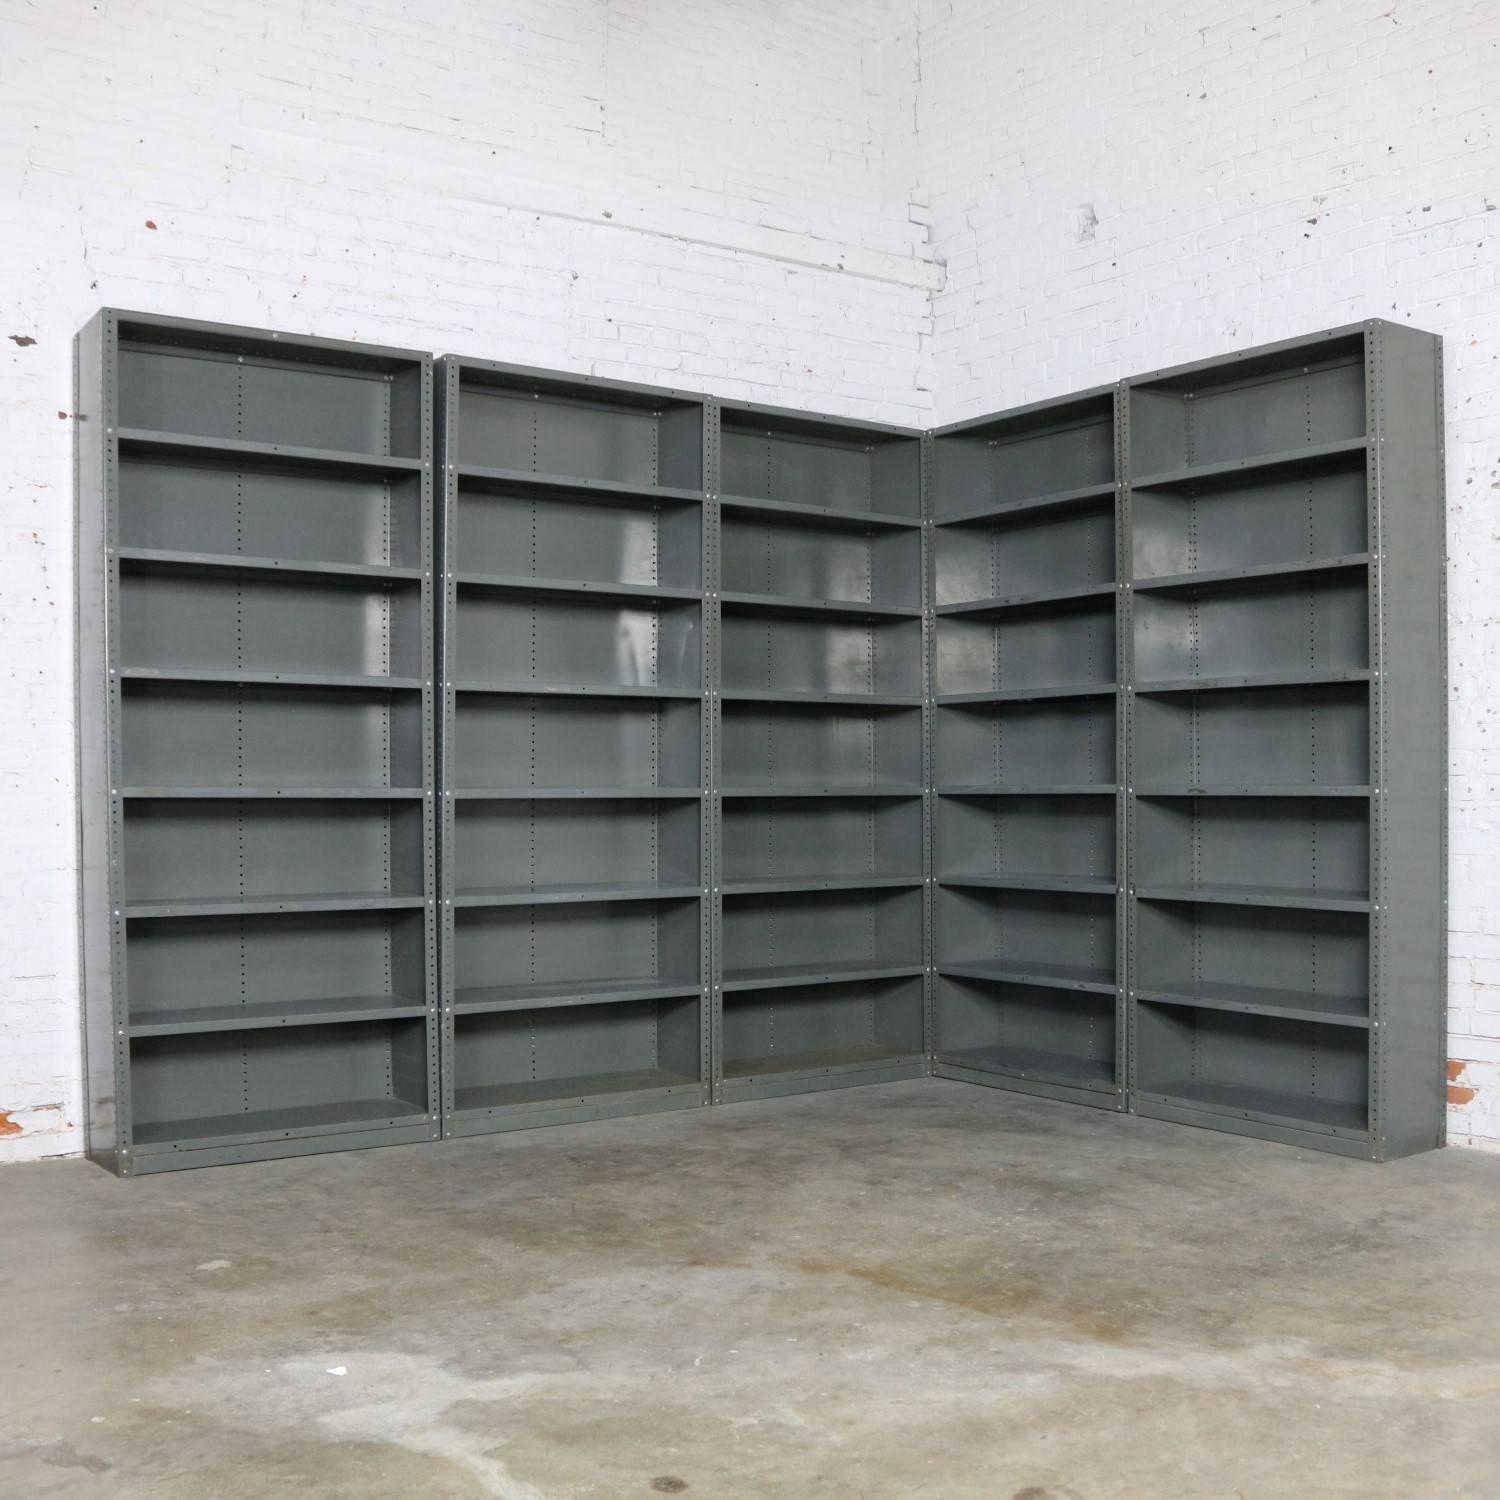 American Industrial Steel Bookcase Shelving Painted Great Patina Vintage